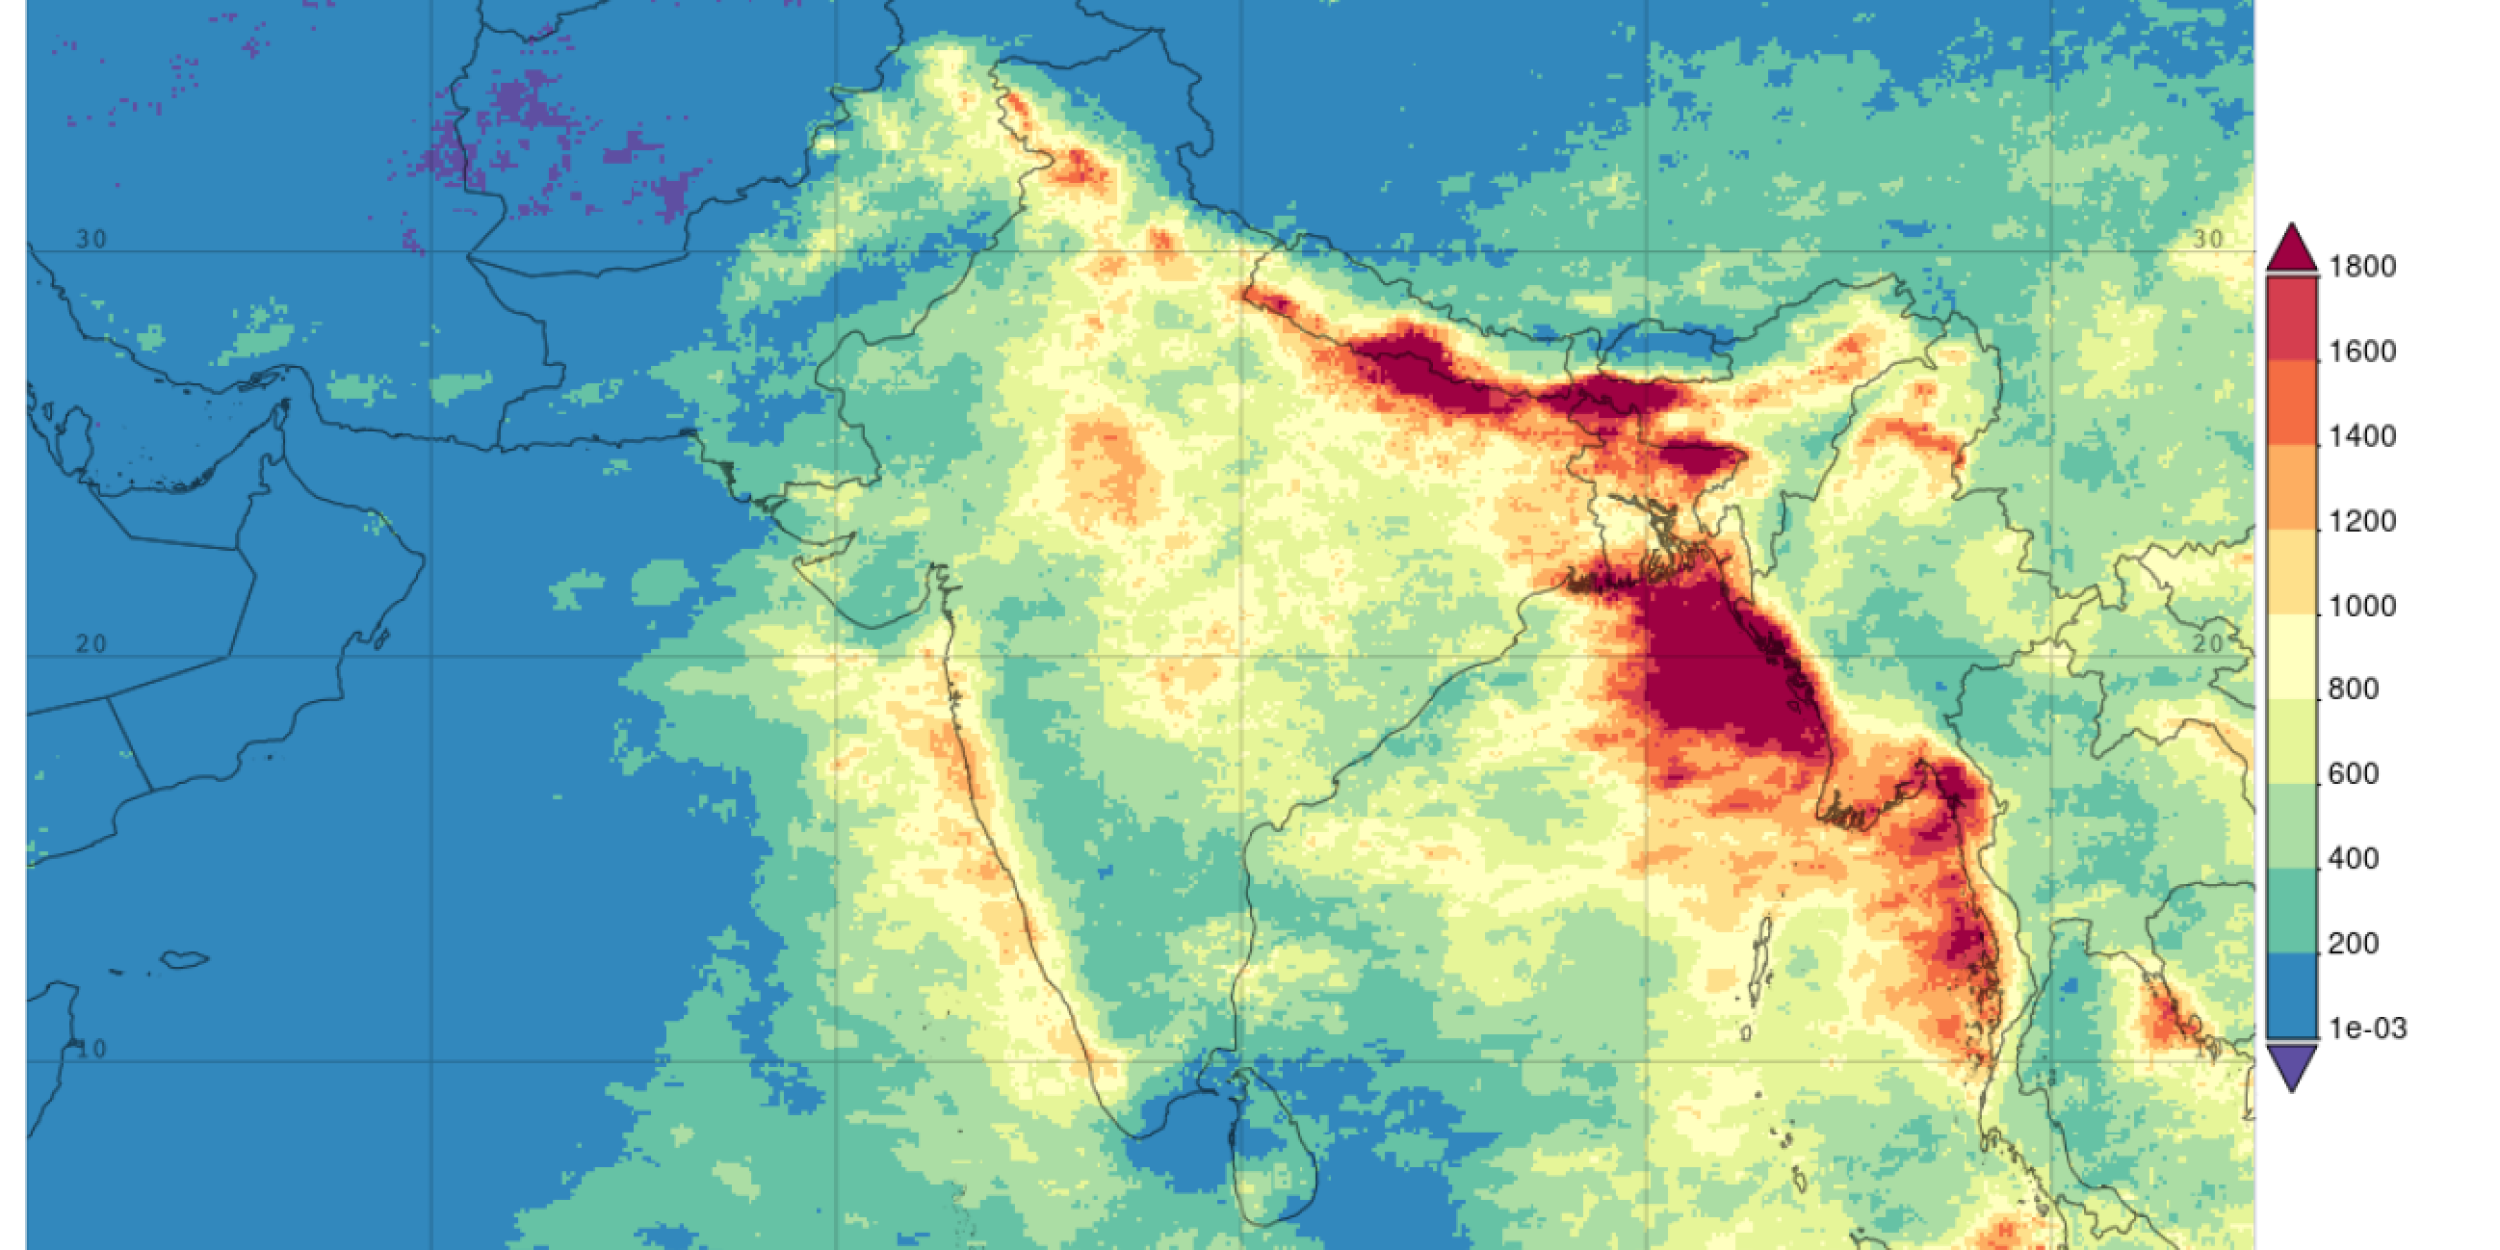 NASA's Integrated Multi-satellitE Retrievals for GPM (IMERG) precipitation product showing summertime monsoon in India during July 2021